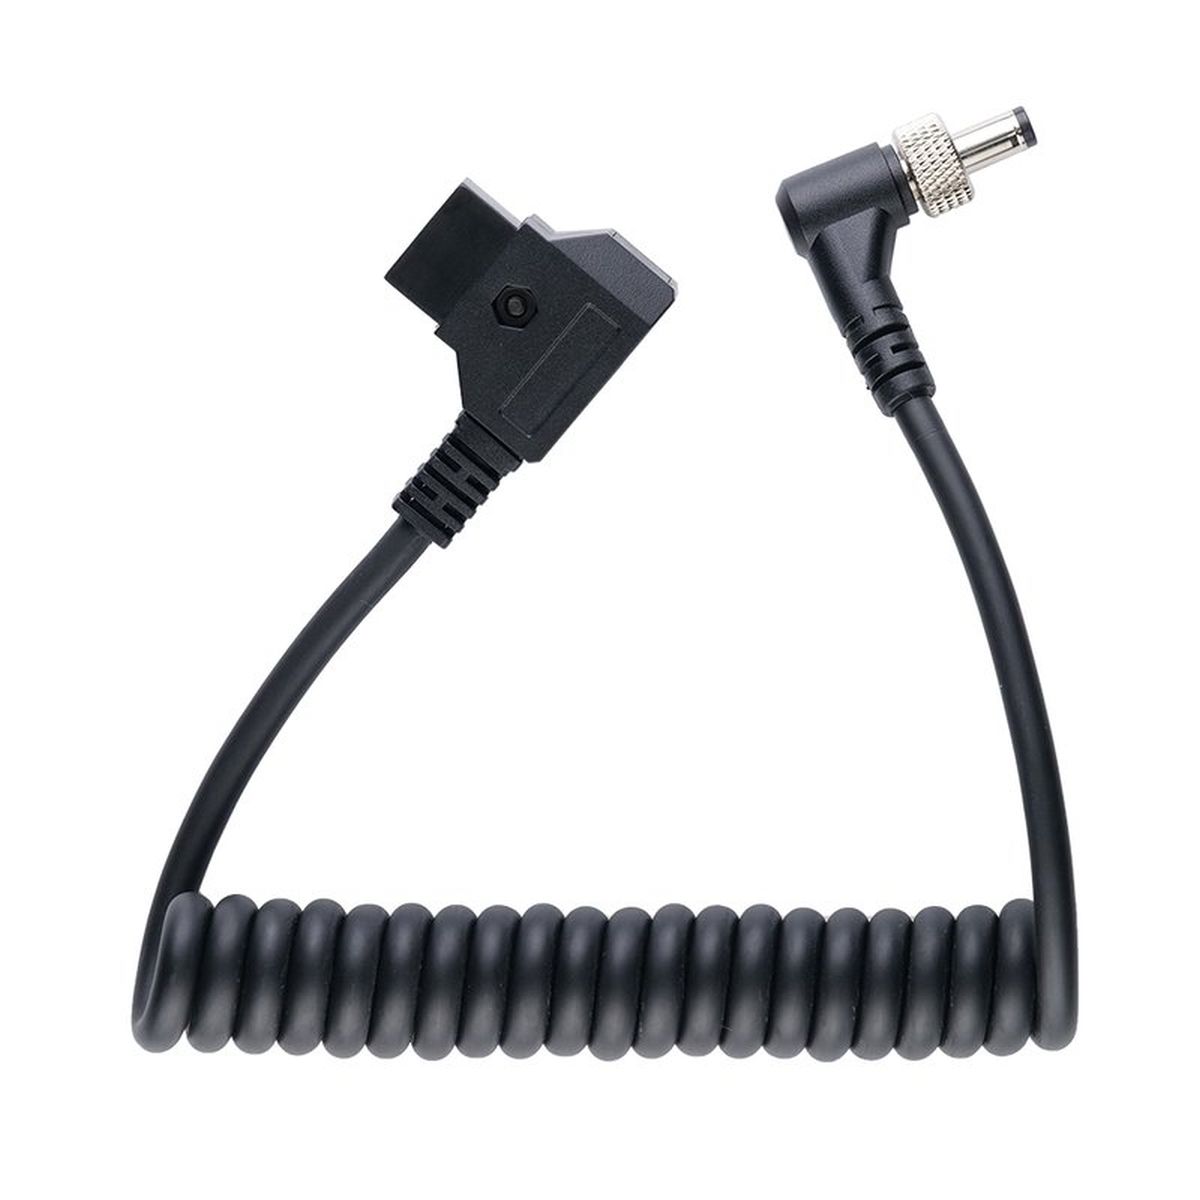 Aputure D-Tap to 5.5mm DC Barrel Power Cable